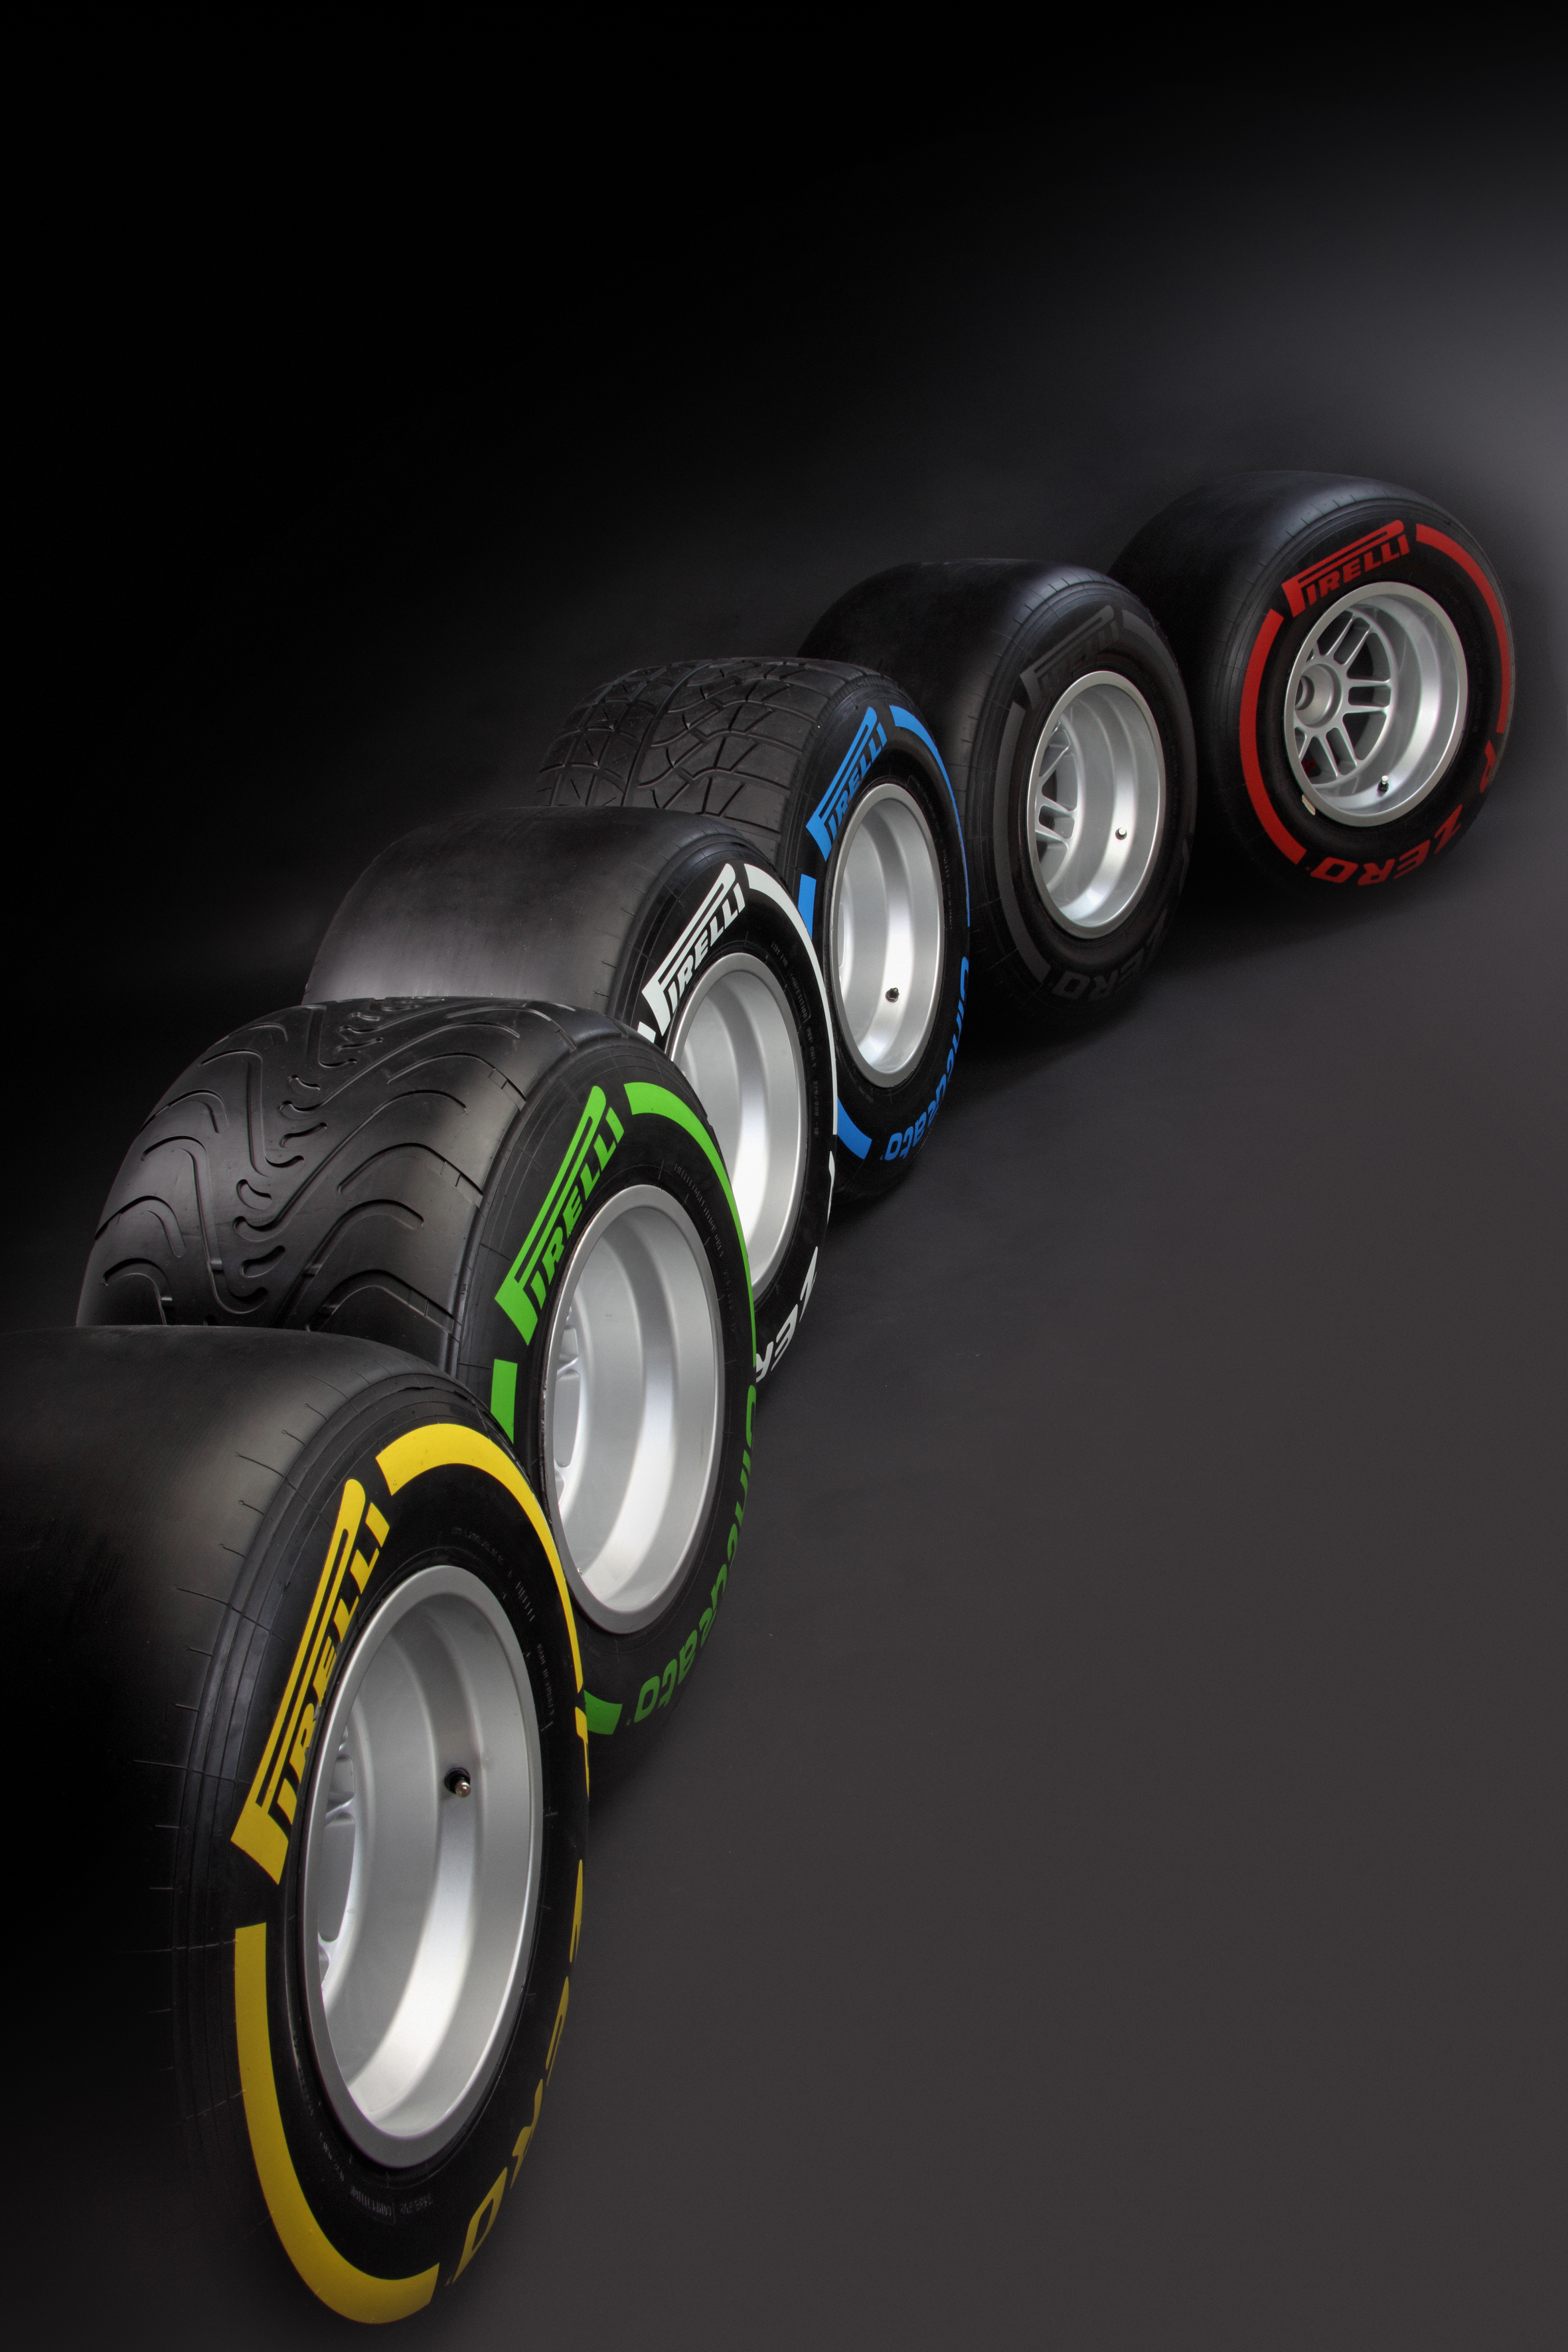 Download this Pirelli Tyres picture